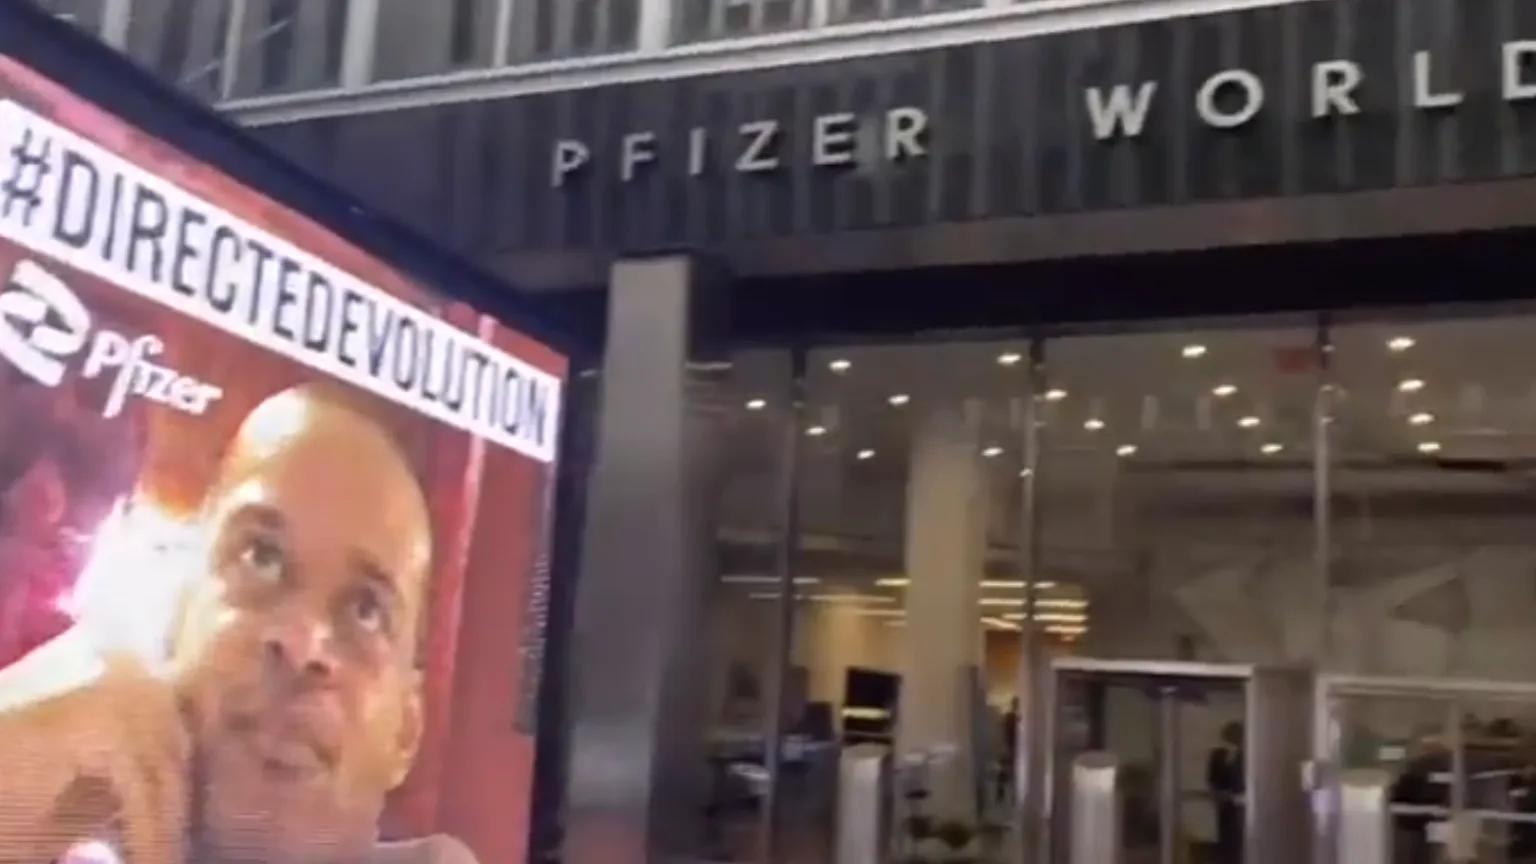 Journalism group goads YouTube, Pfizer after viral video release